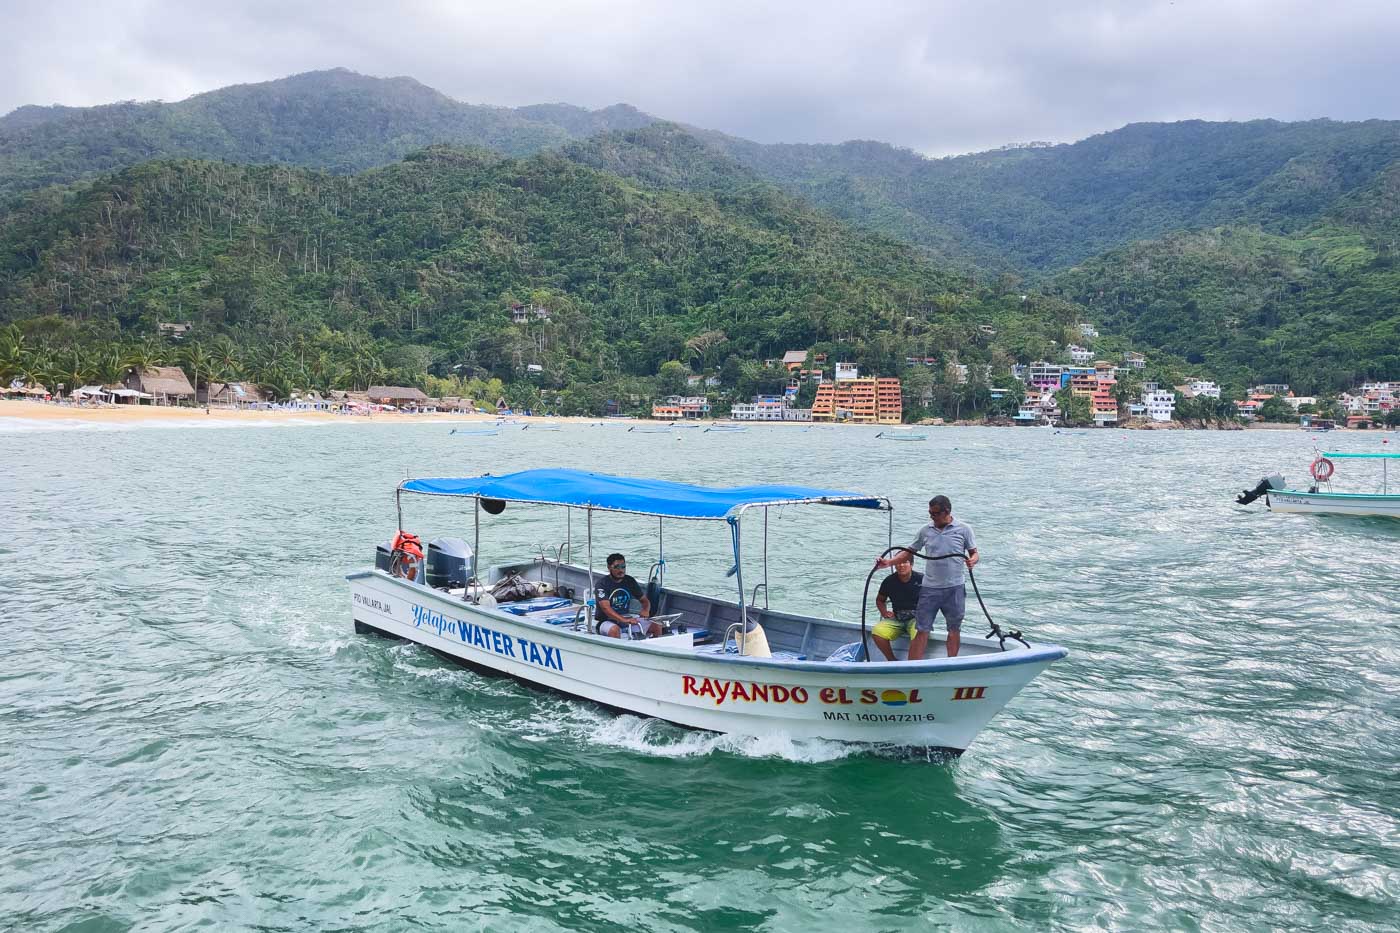 Water taxi amongst the mountains in Yelapa.